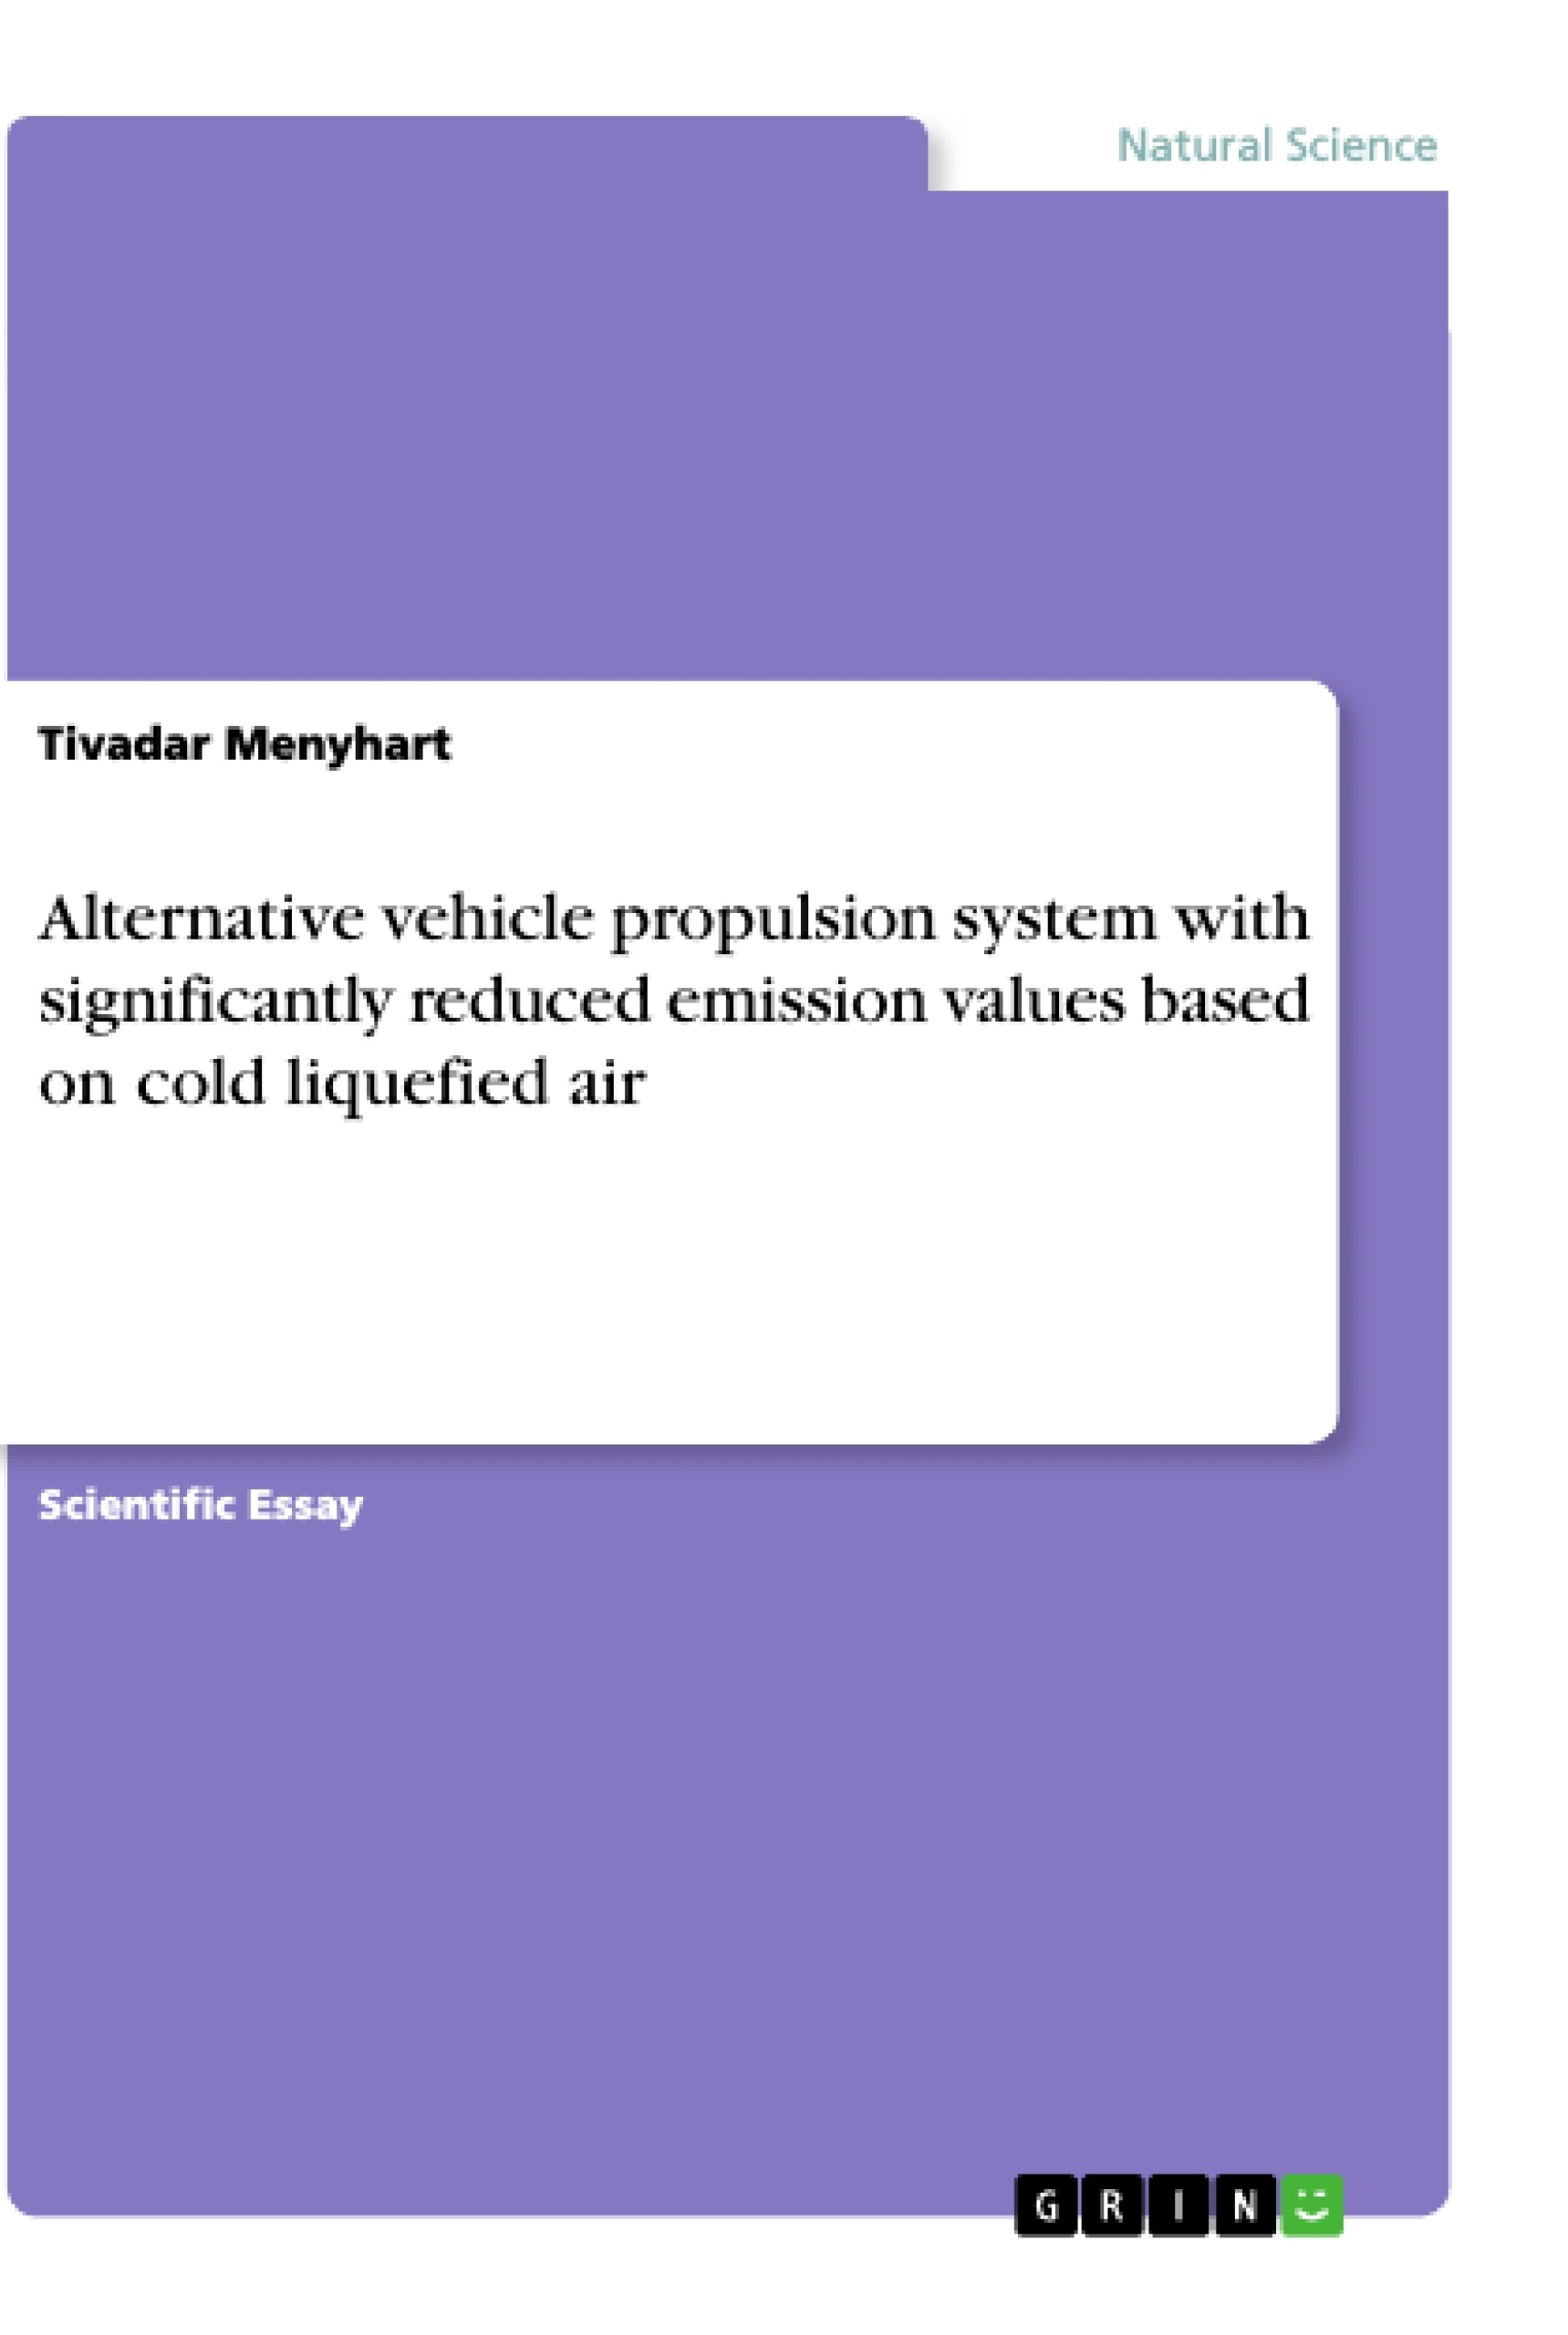 Title: Alternative vehicle propulsion system with significantly reduced emission values based on cold liquefied air